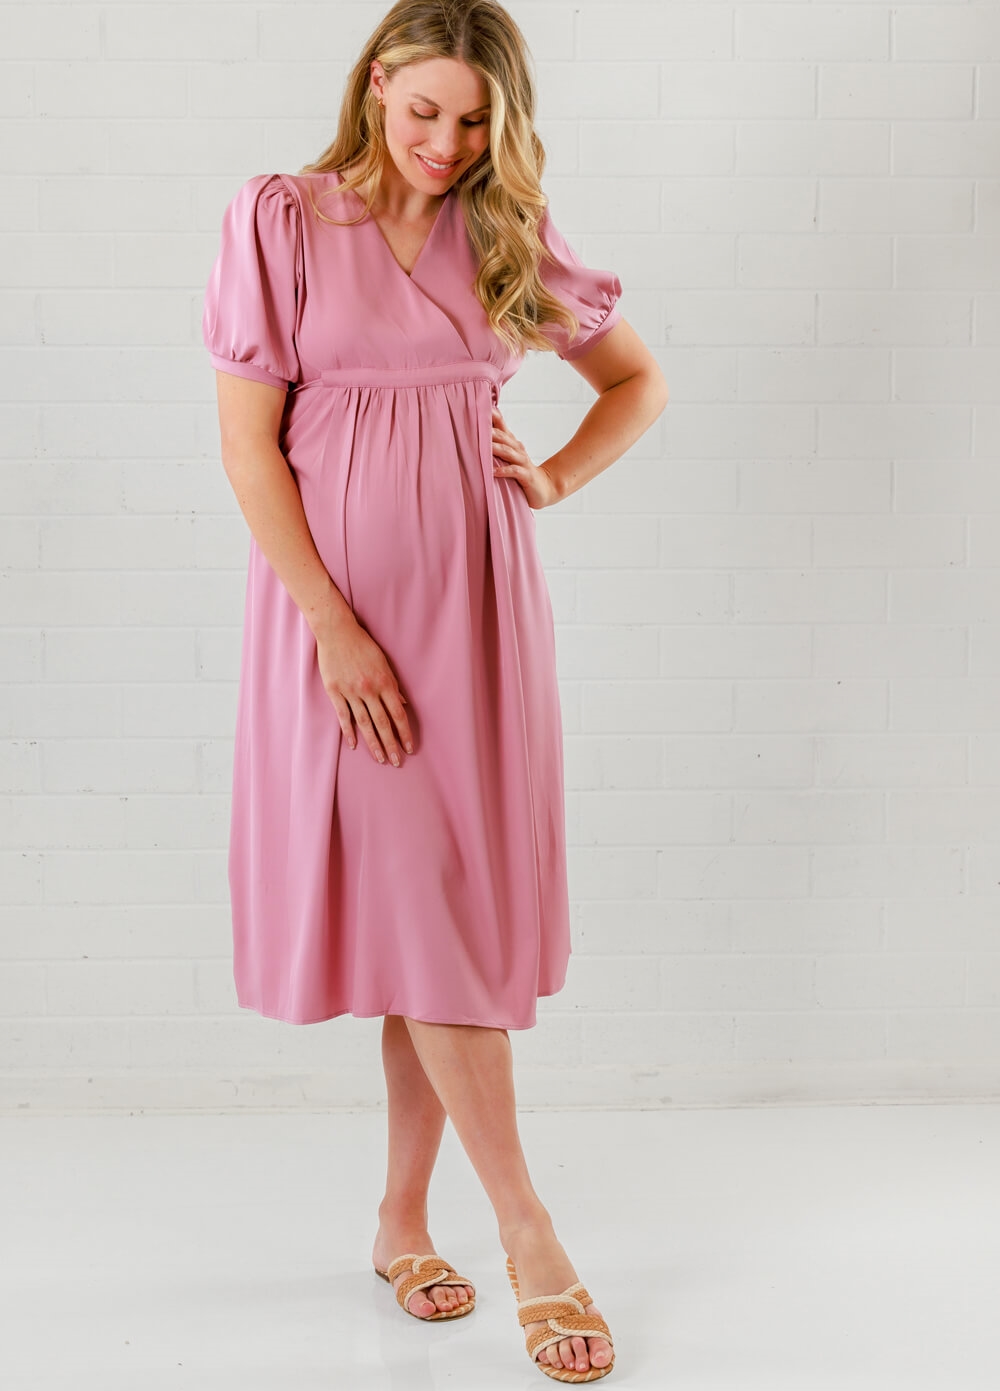 Lait & Co - Anna-Elea Maternity Cocktail Dress in Pink